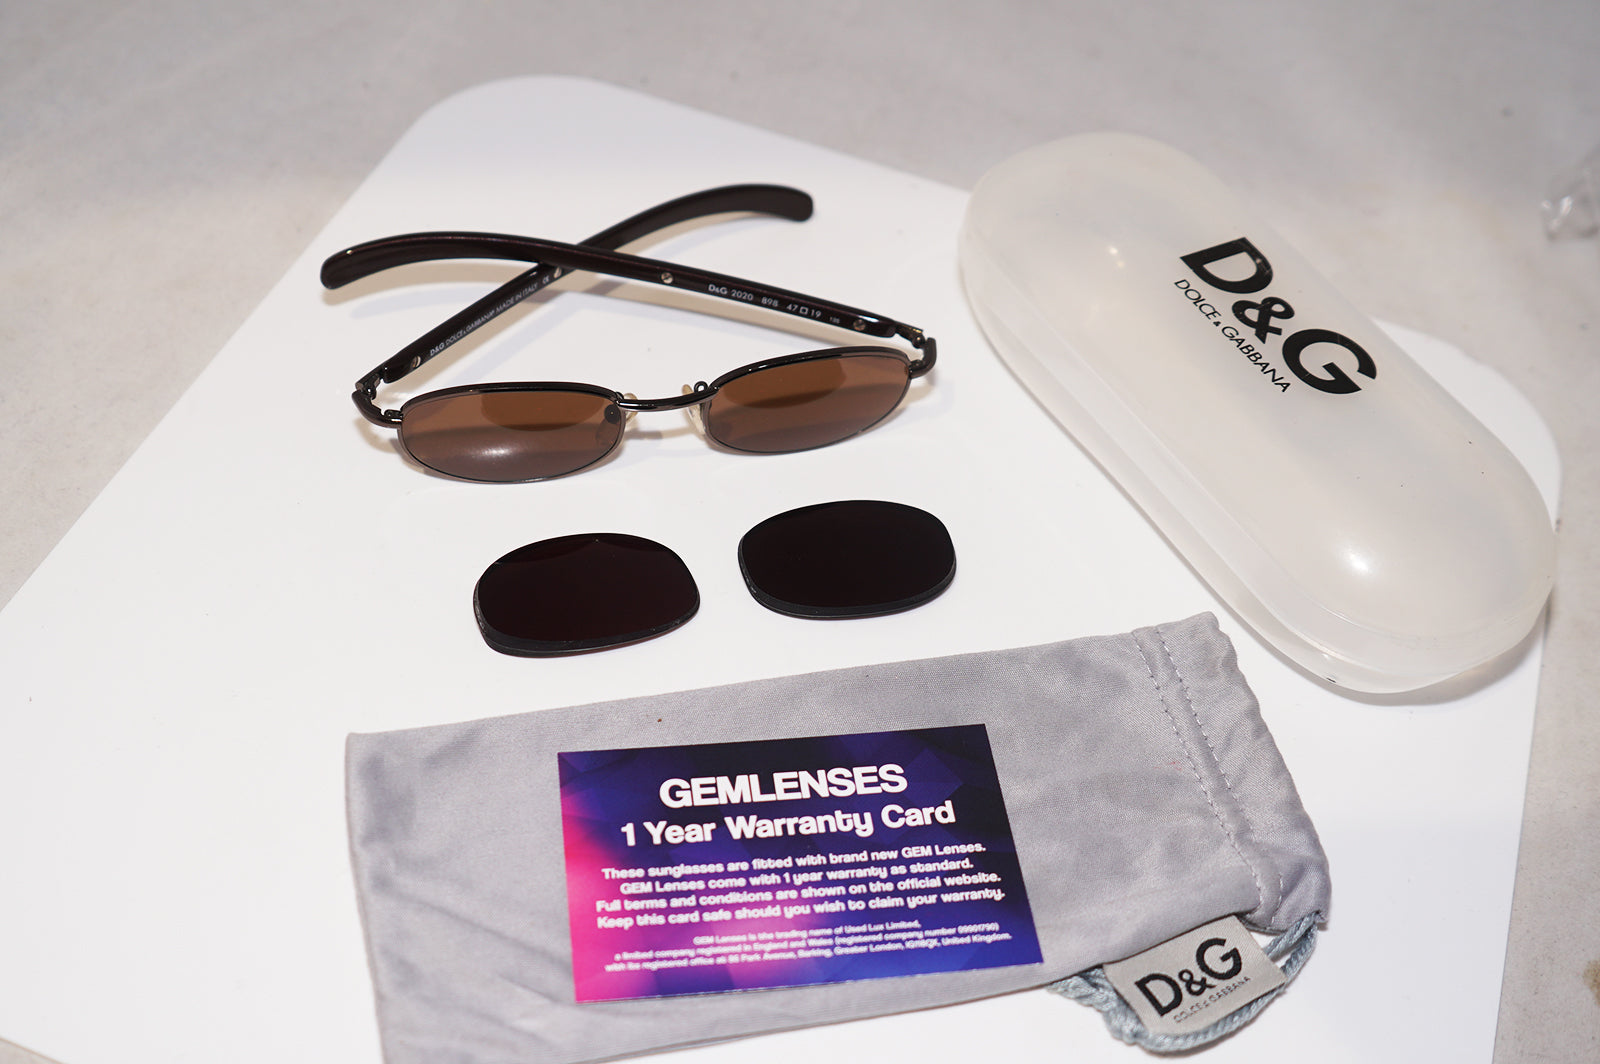 d and g sunglasses 2020